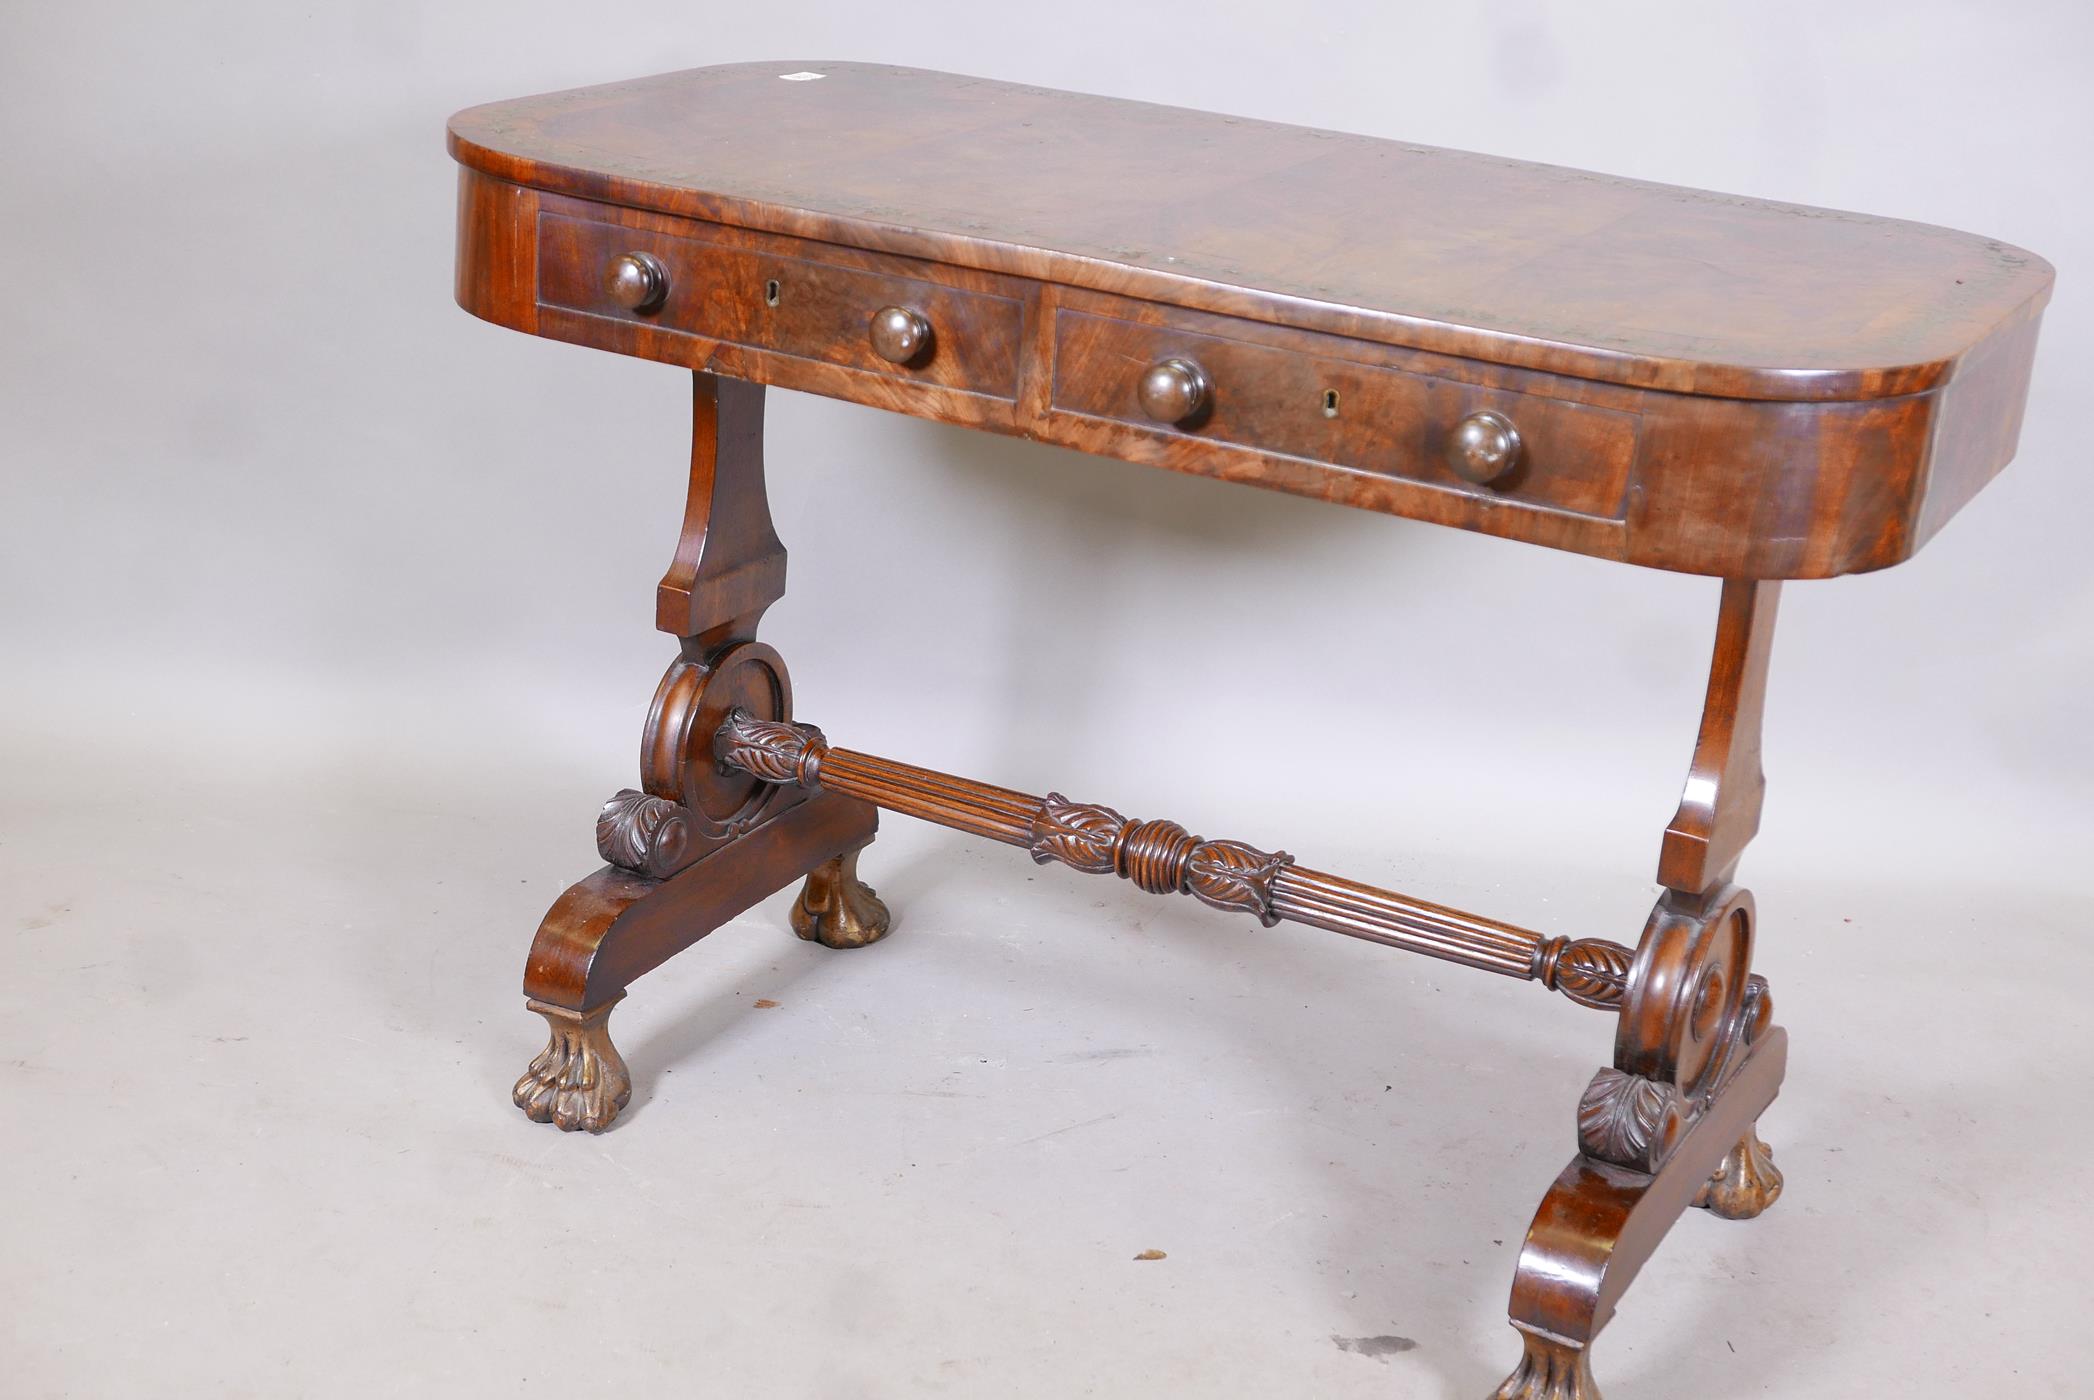 A C19th flame mahogany centre table, with two true and two false drawers, the top with rosewood - Image 6 of 6